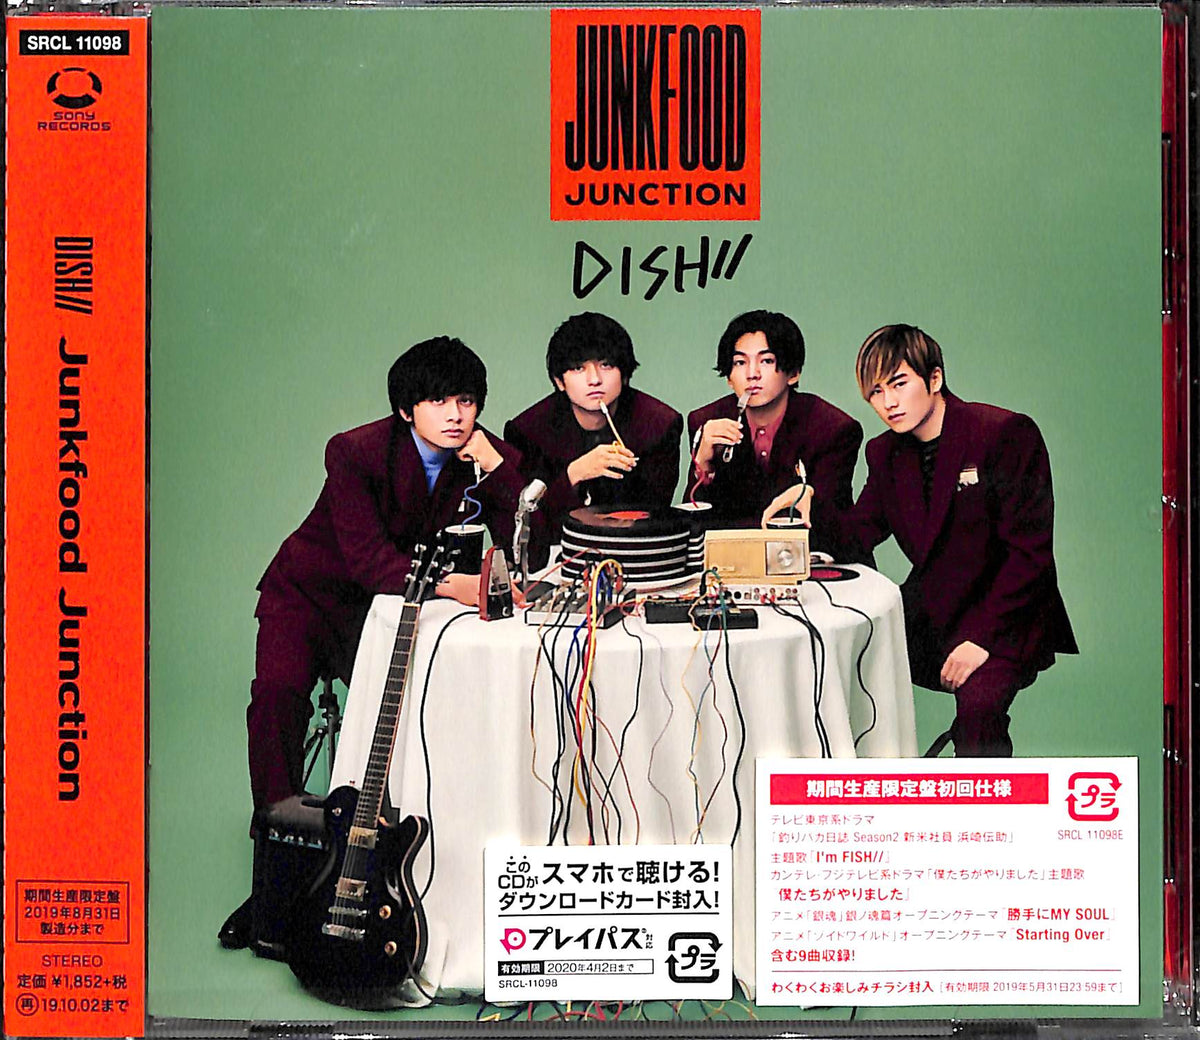 Junkfood Junction / DISH//[CD] – Books Channel Store